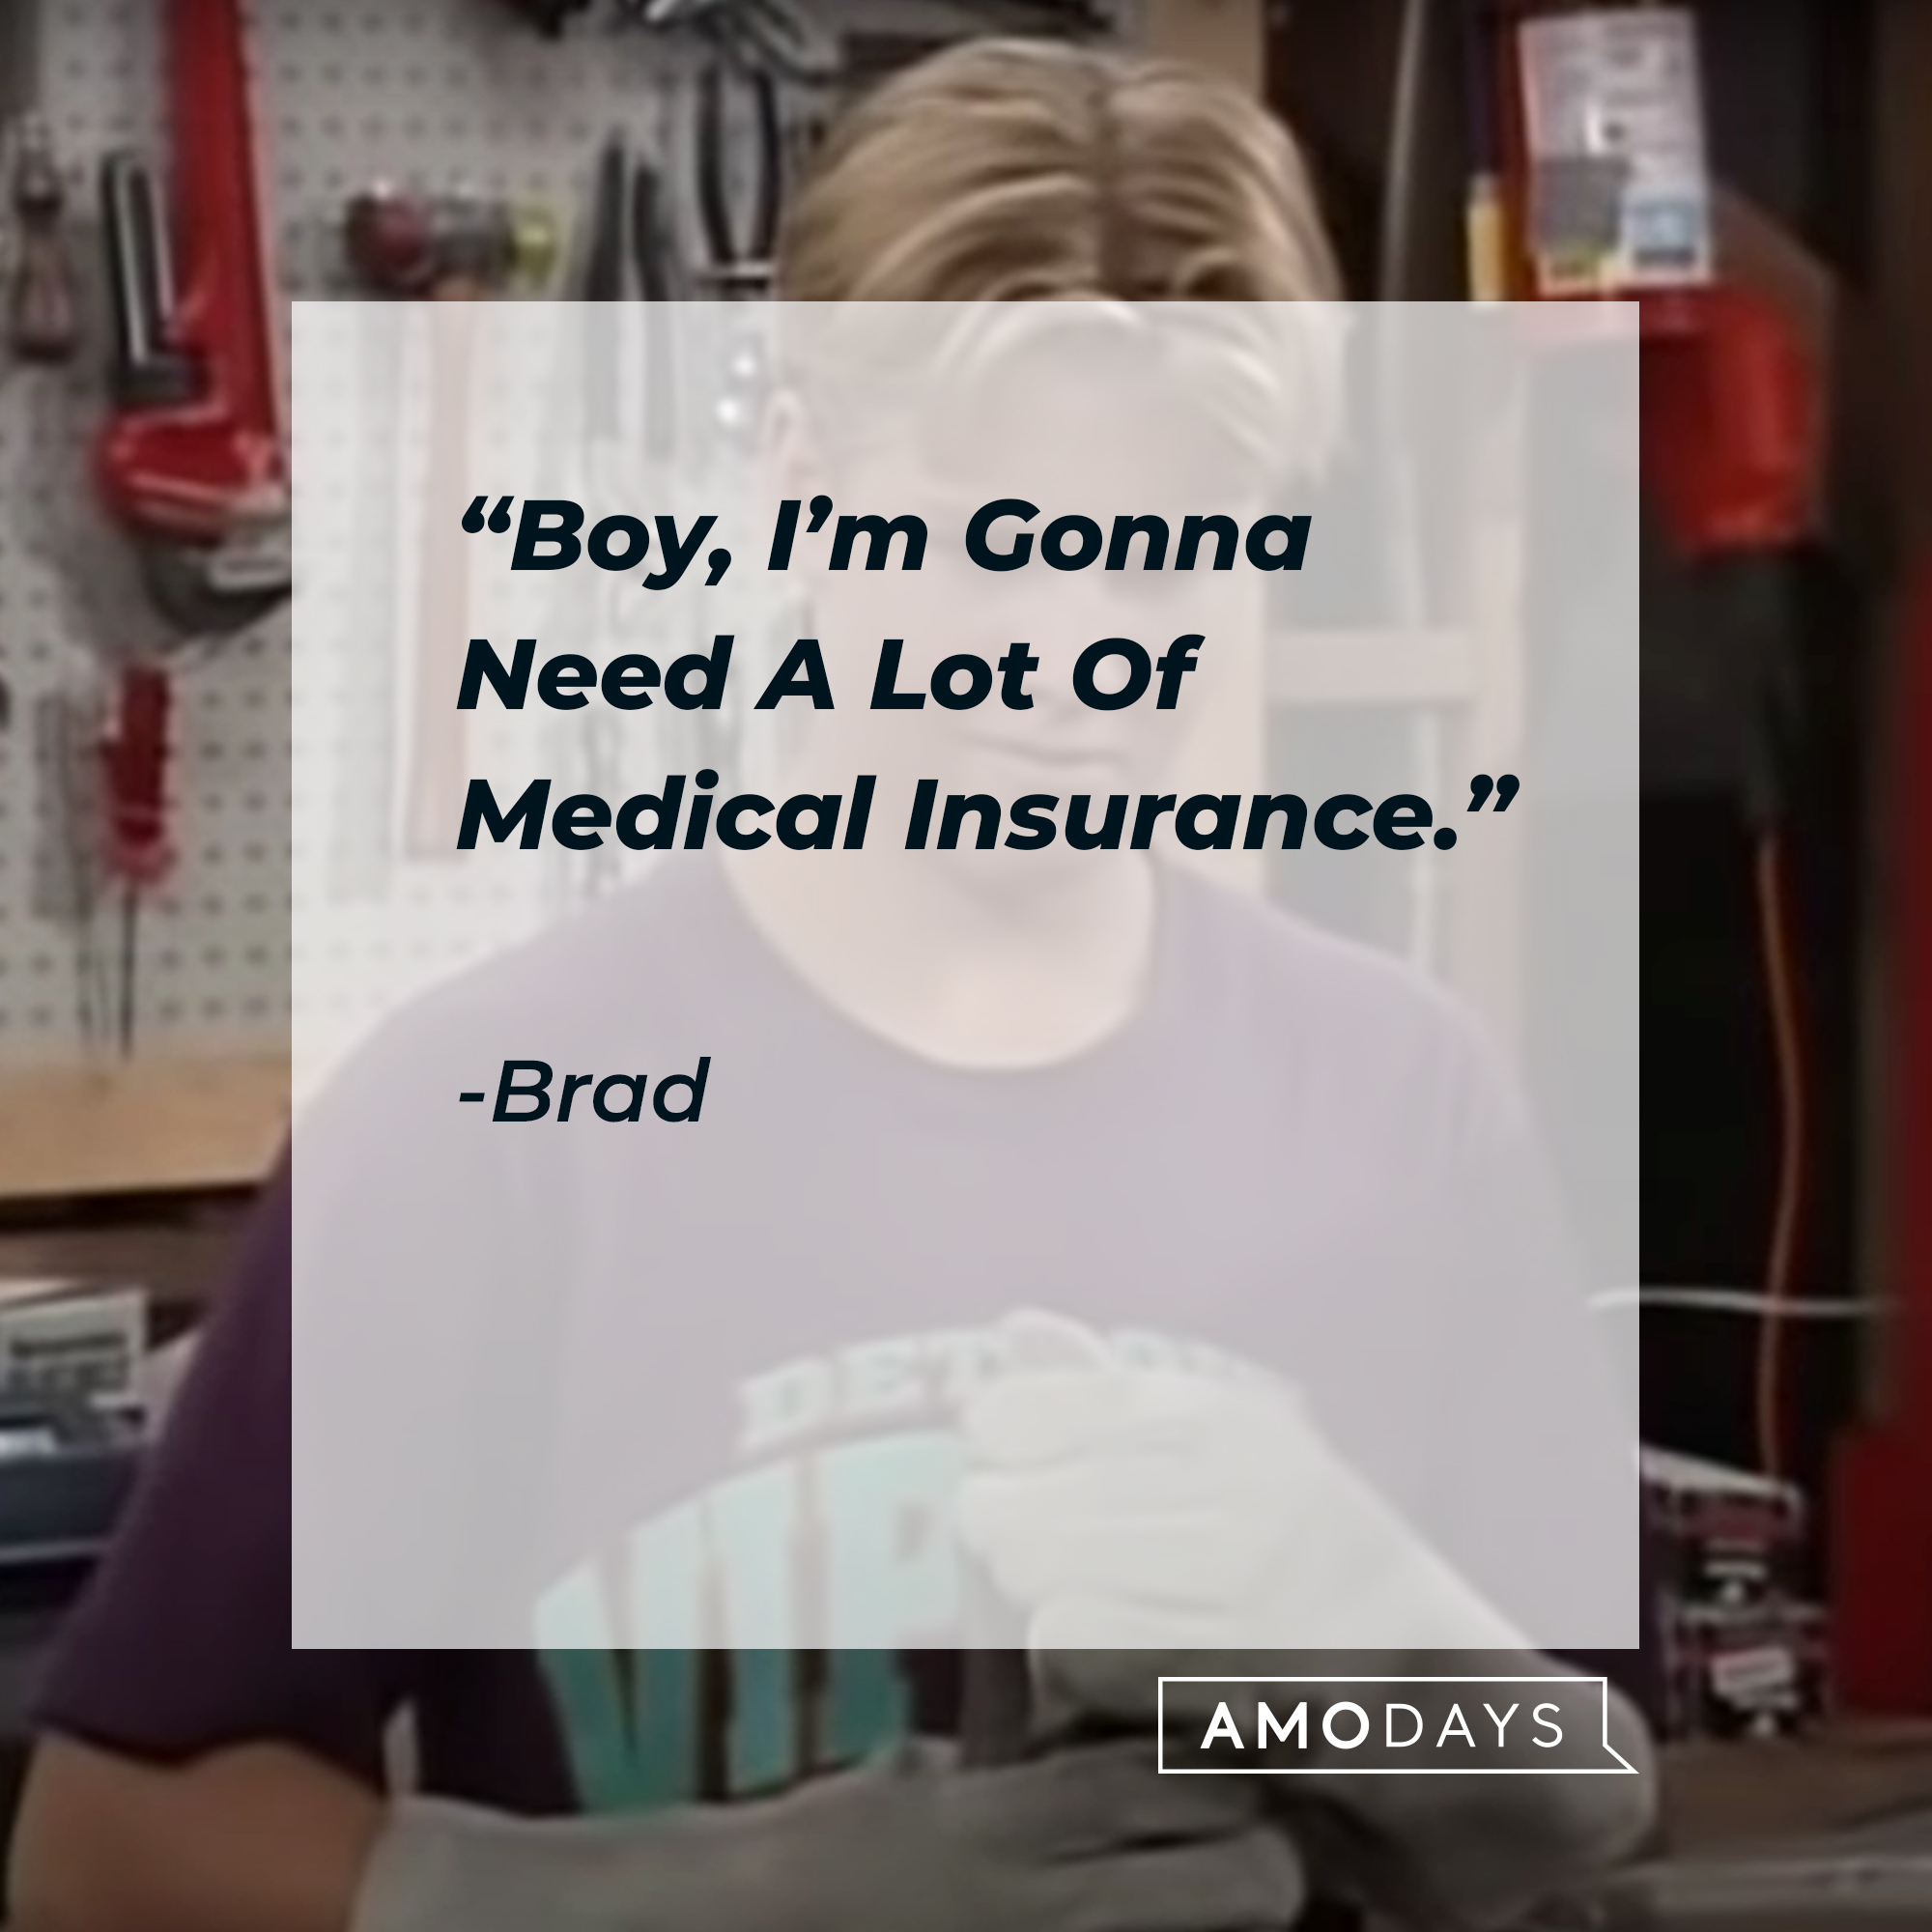 Brad's quote: “Boy, I’m Gonna Need A Lot Of Medical Insurance.” | Source: youtube.com/ABCNetwork